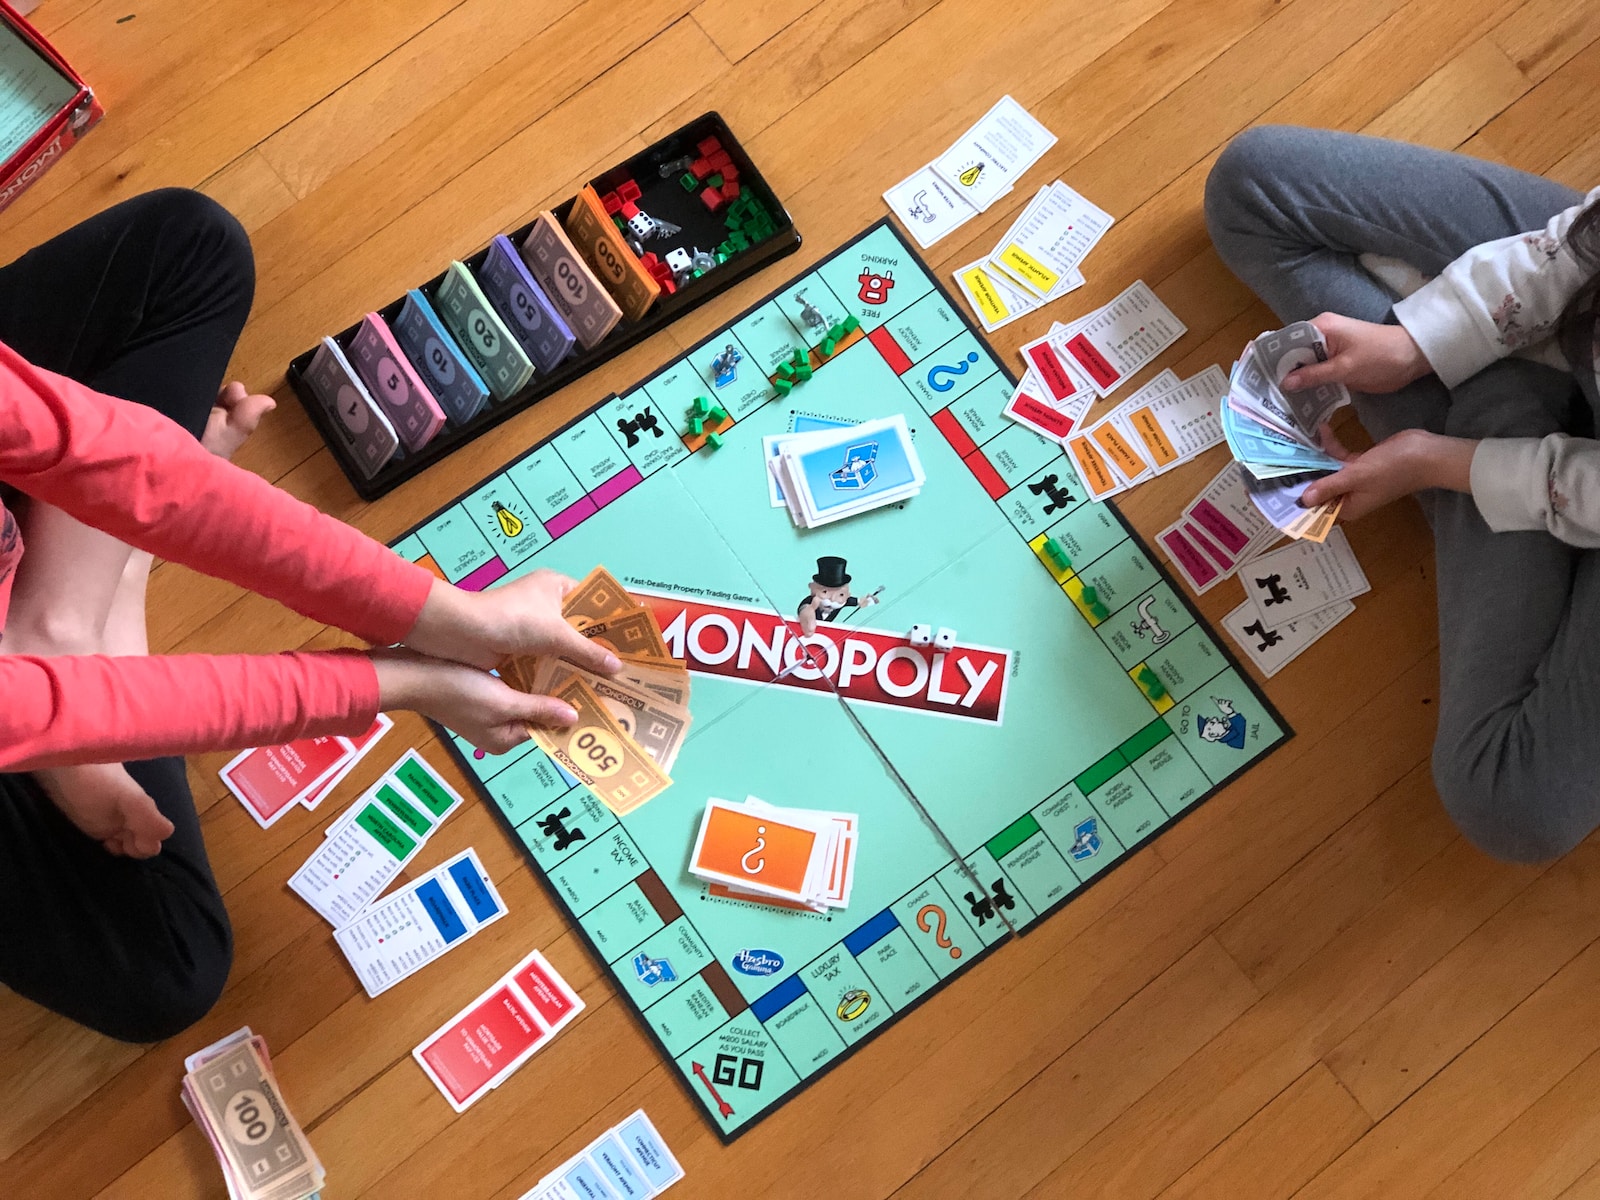 Monopoly: the timeless board game of strategy, luck, and real estate